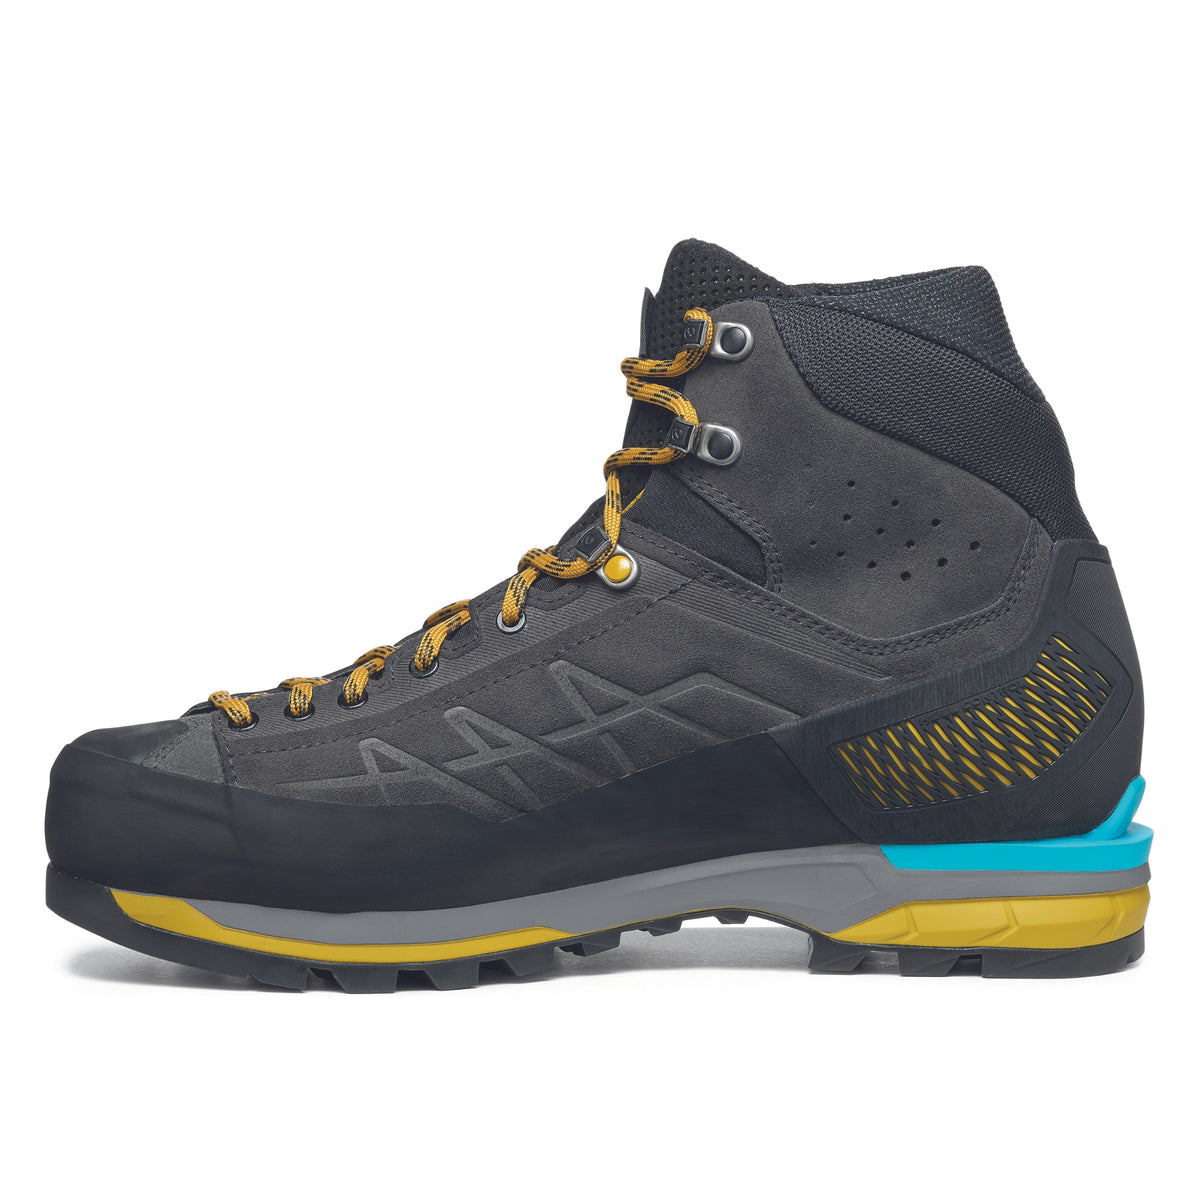 Scarpa Zodiac Tech GTX mens boots in anthracite sulphur colour. Showing inside side on view.